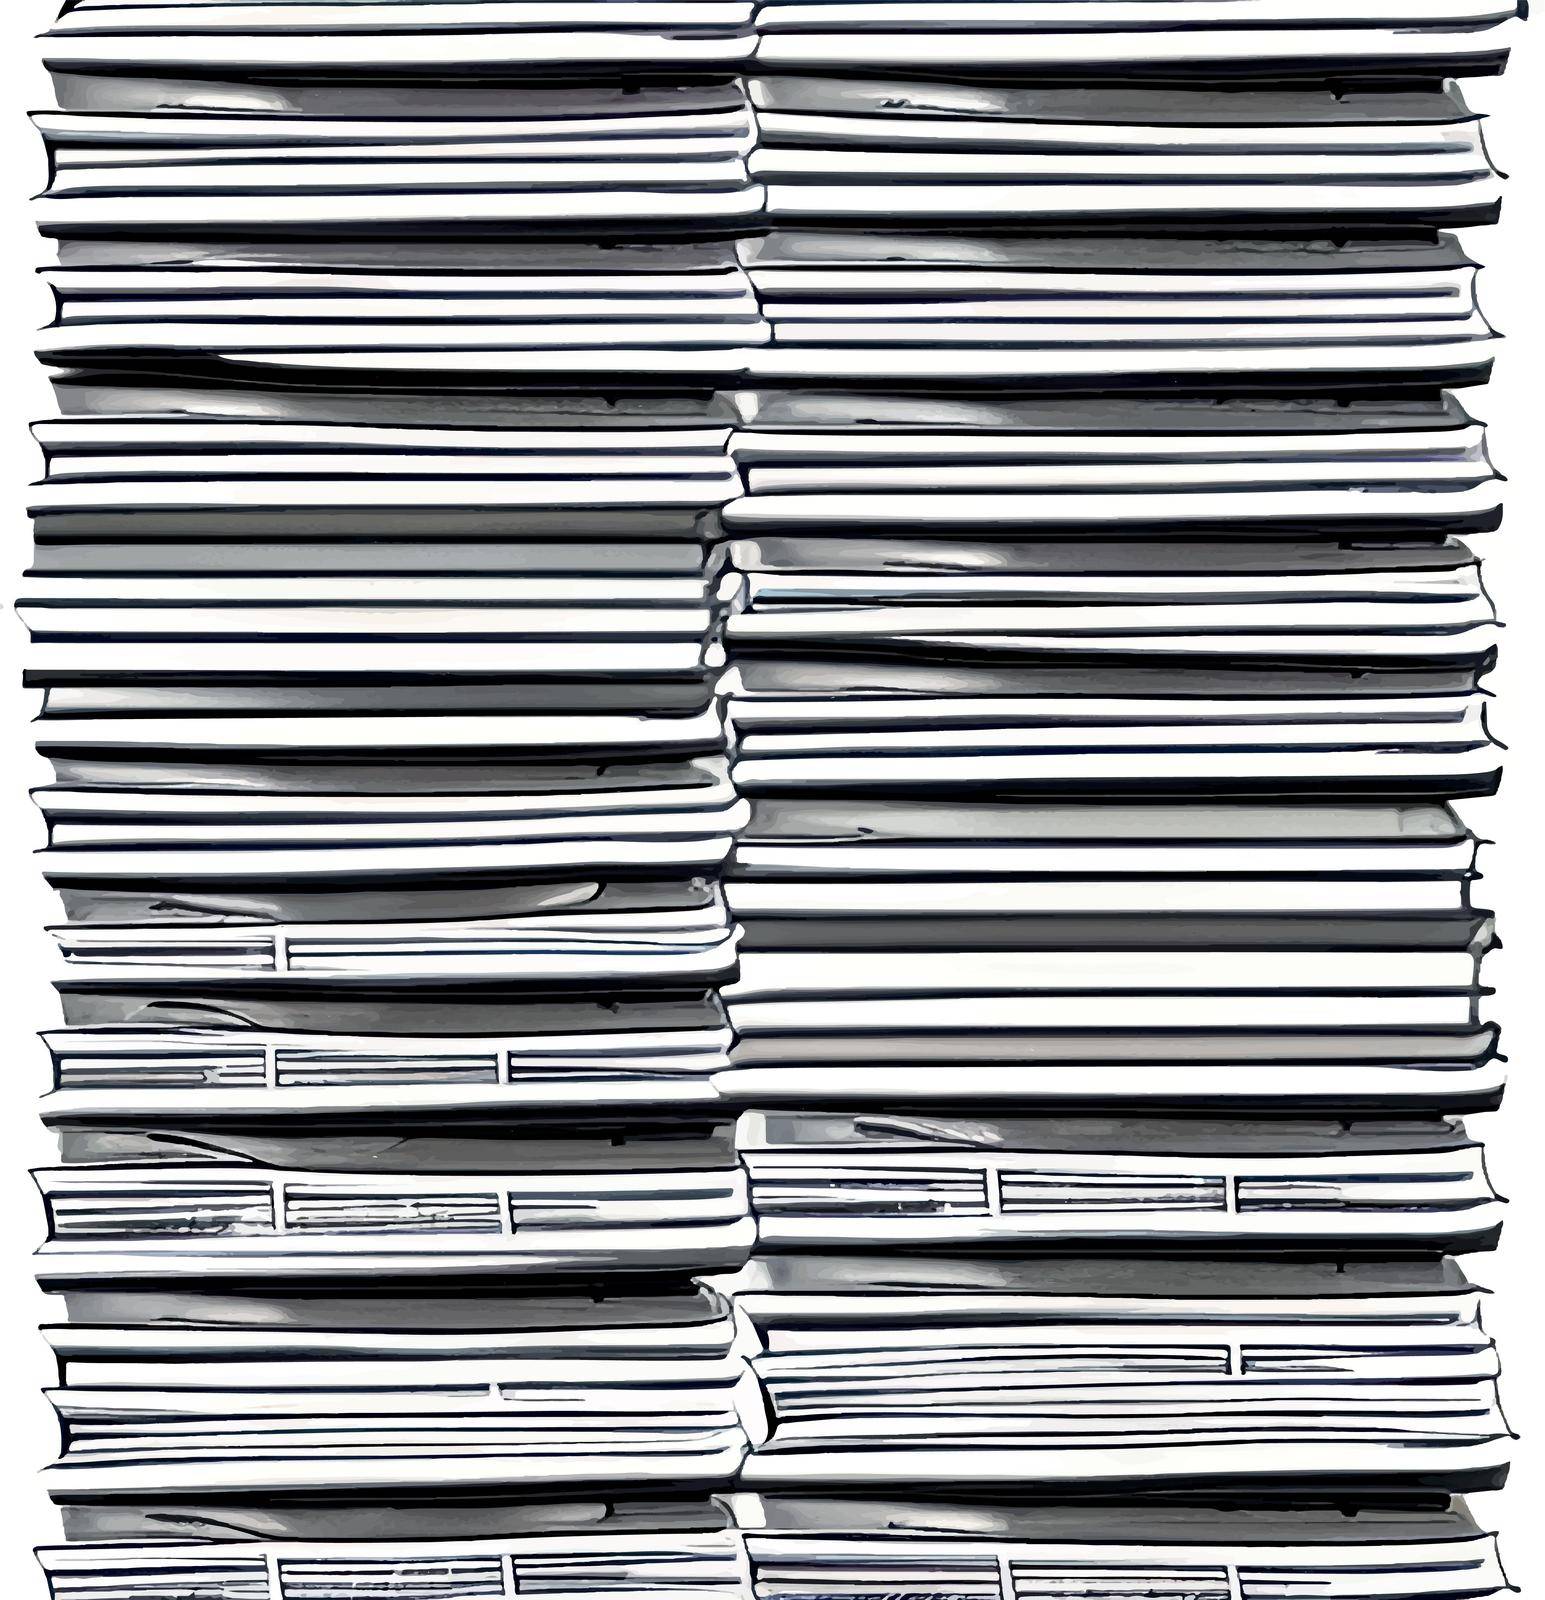 close-up stack of daily newspapers